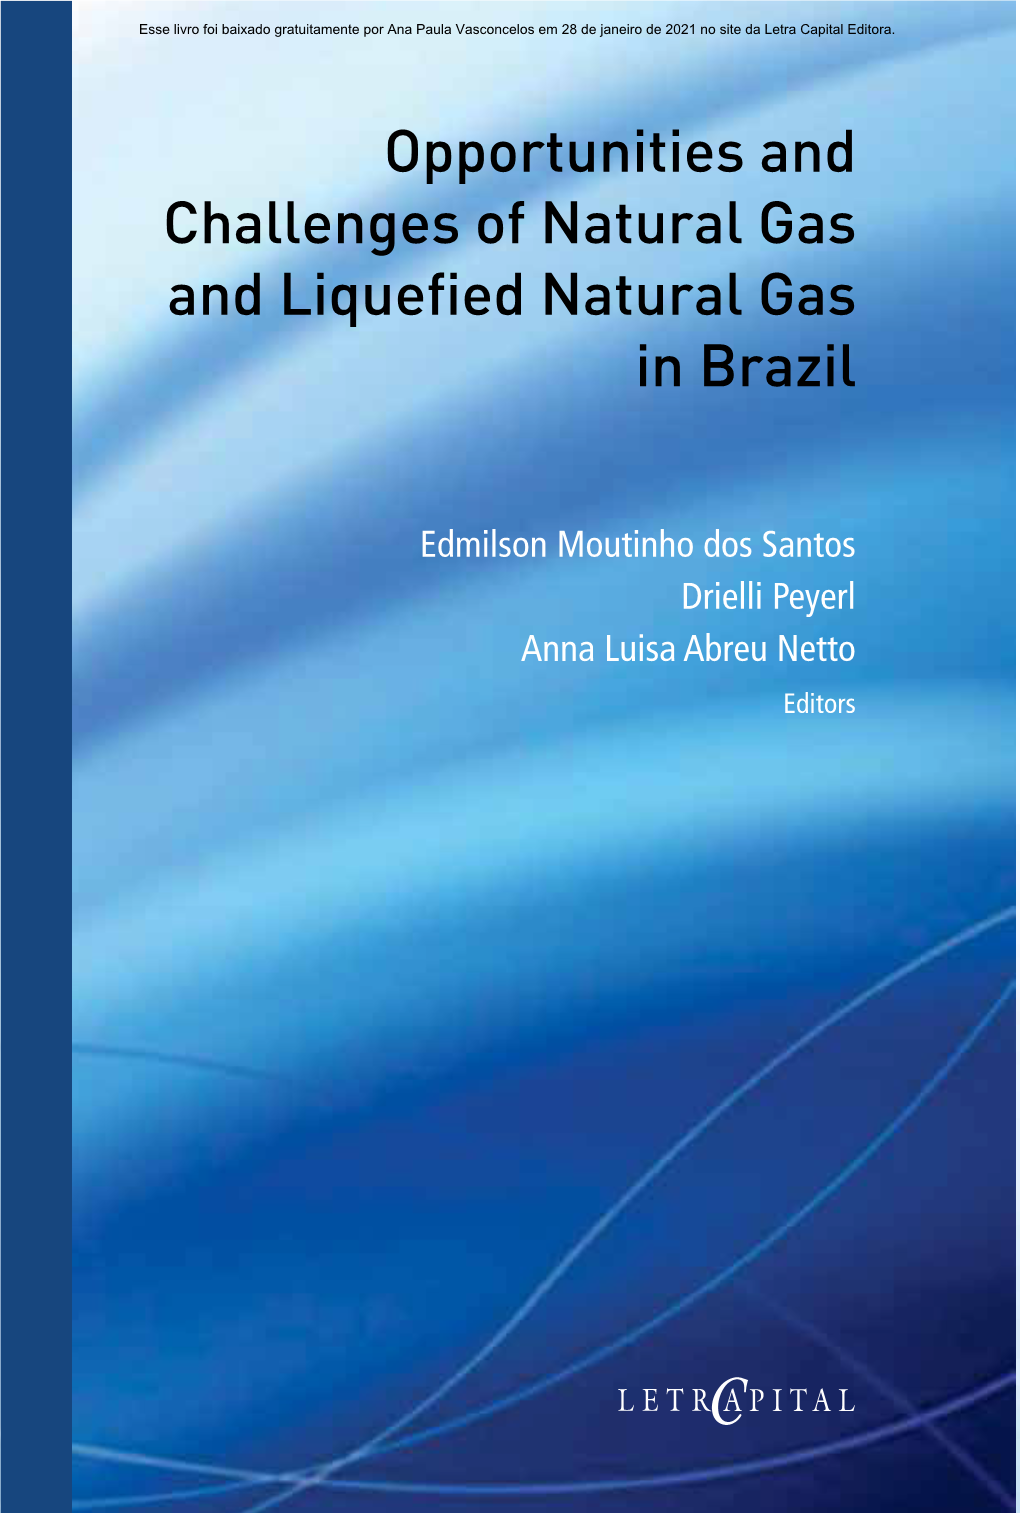 Opportunities and Challenges of Natural Gas and Liquefied Natural